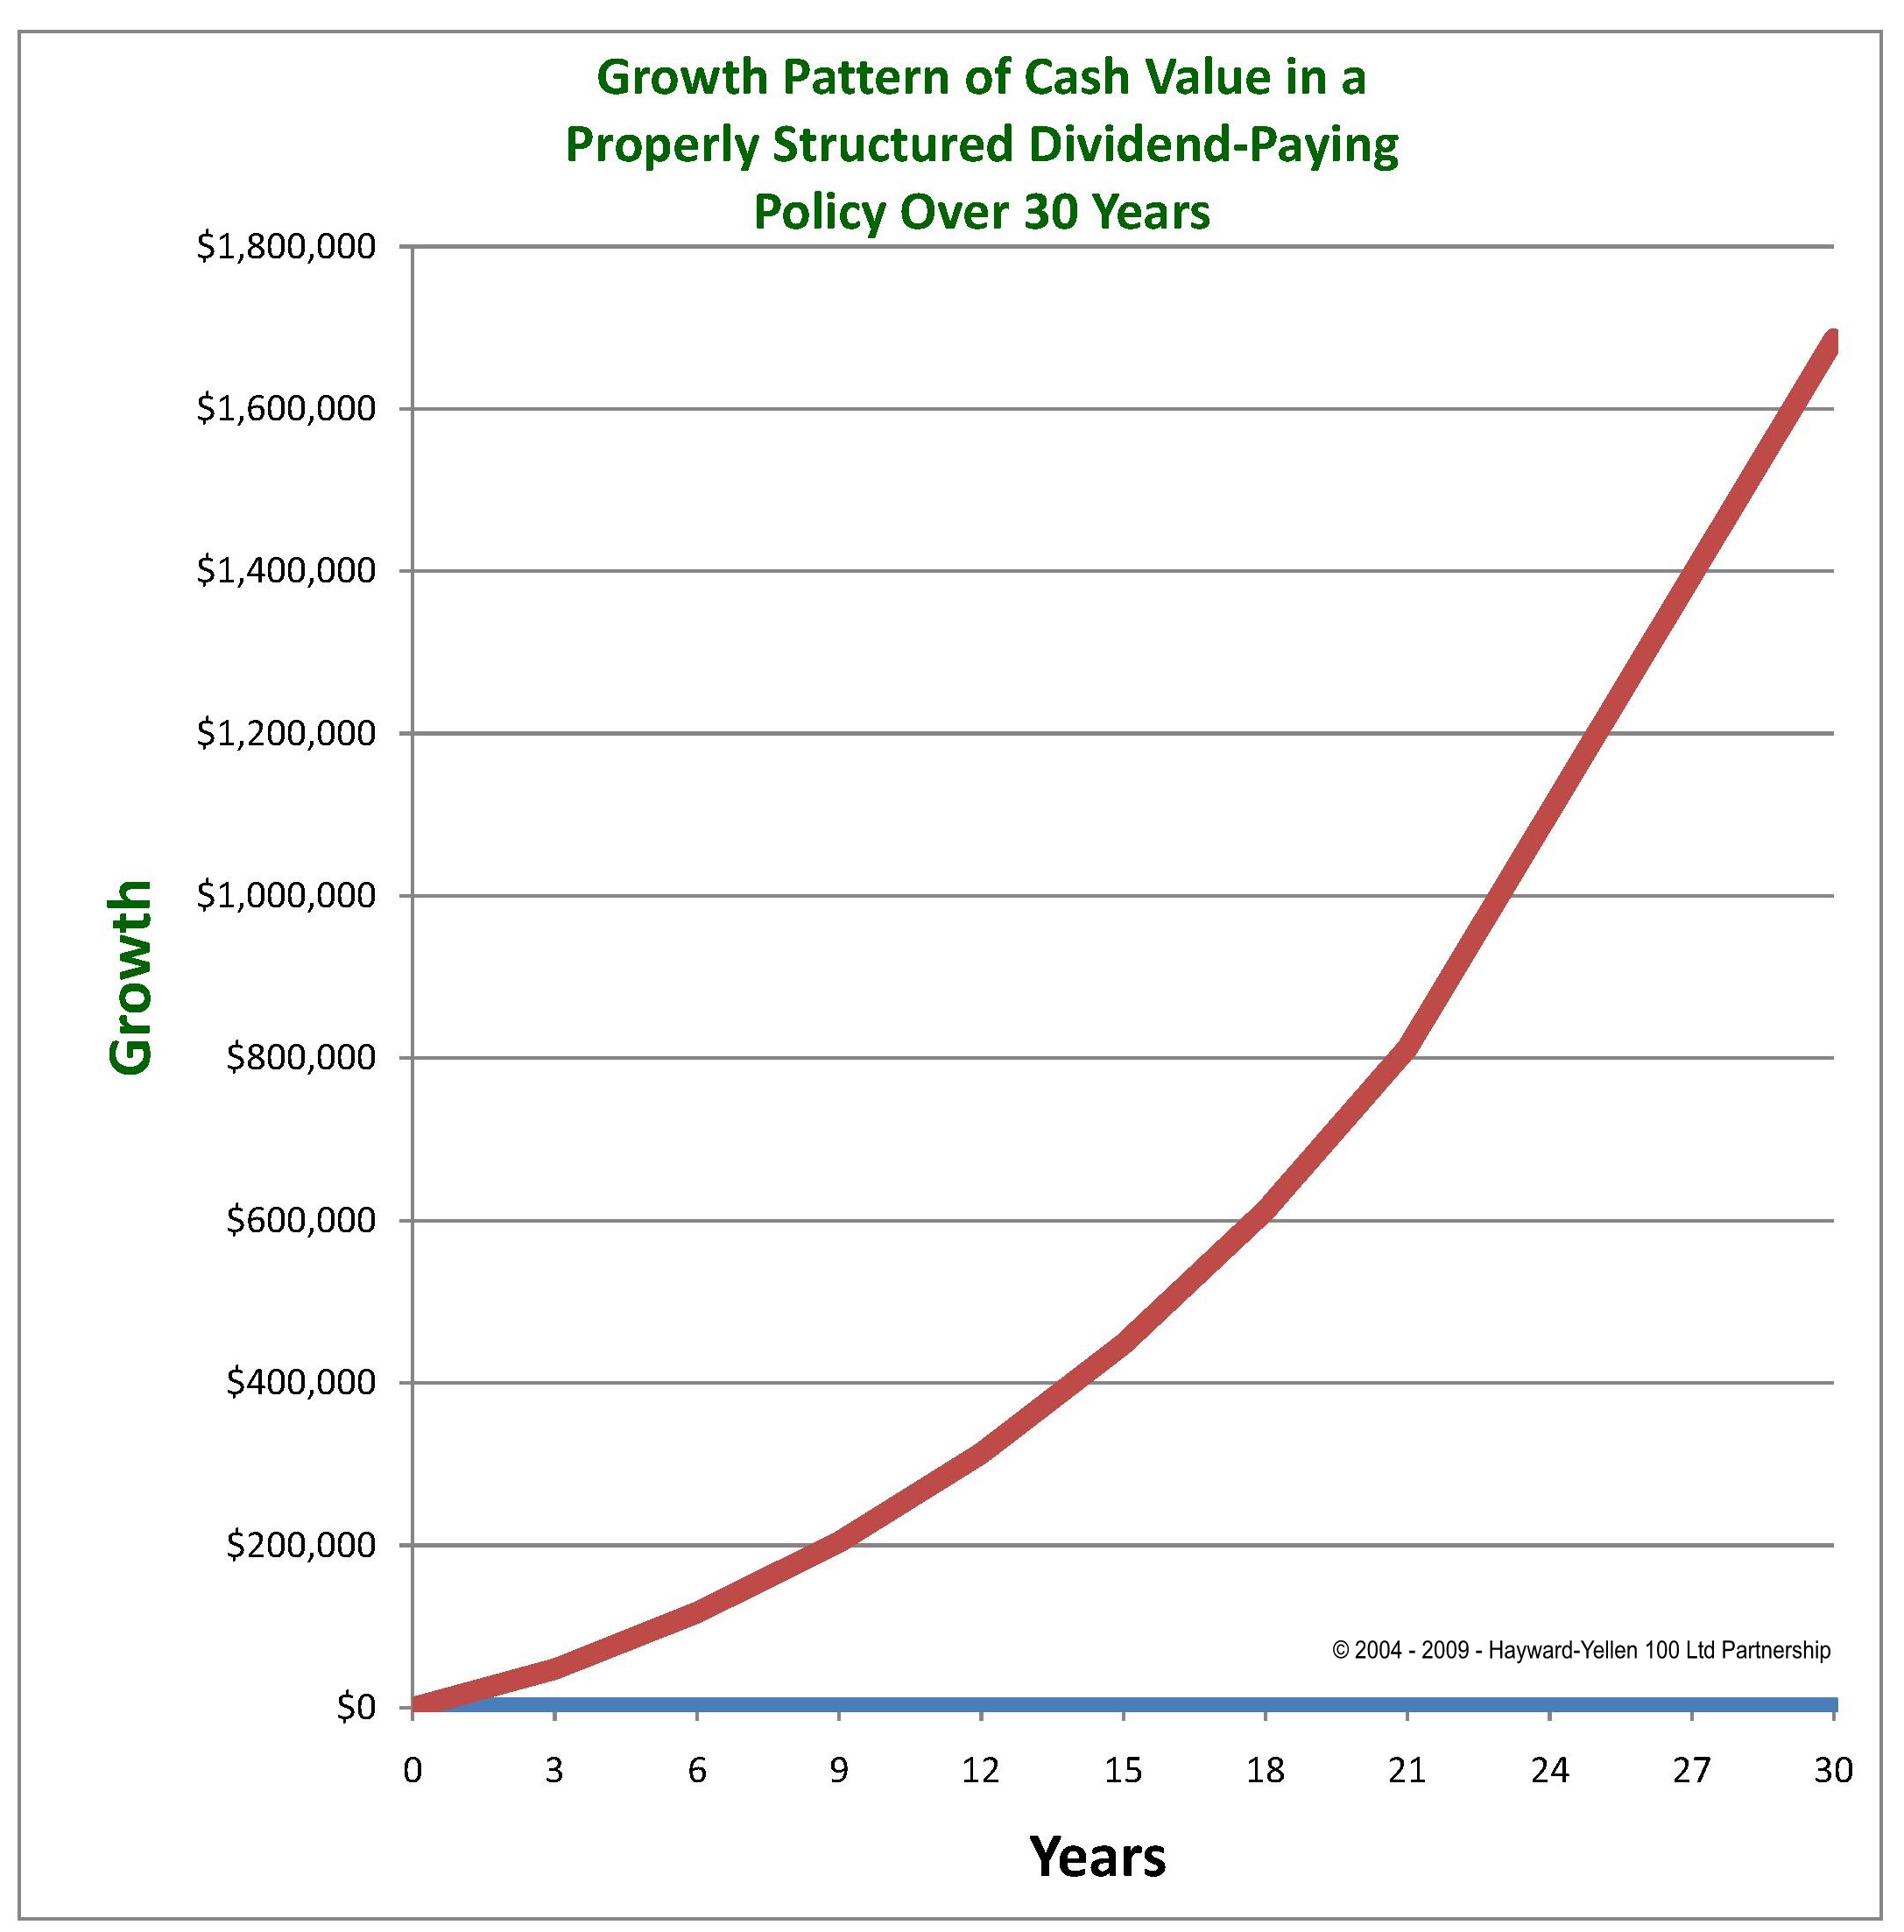 Growth Pattern of Cash Value in a Properly Structured Dividend-Paying Policy over 30 Years